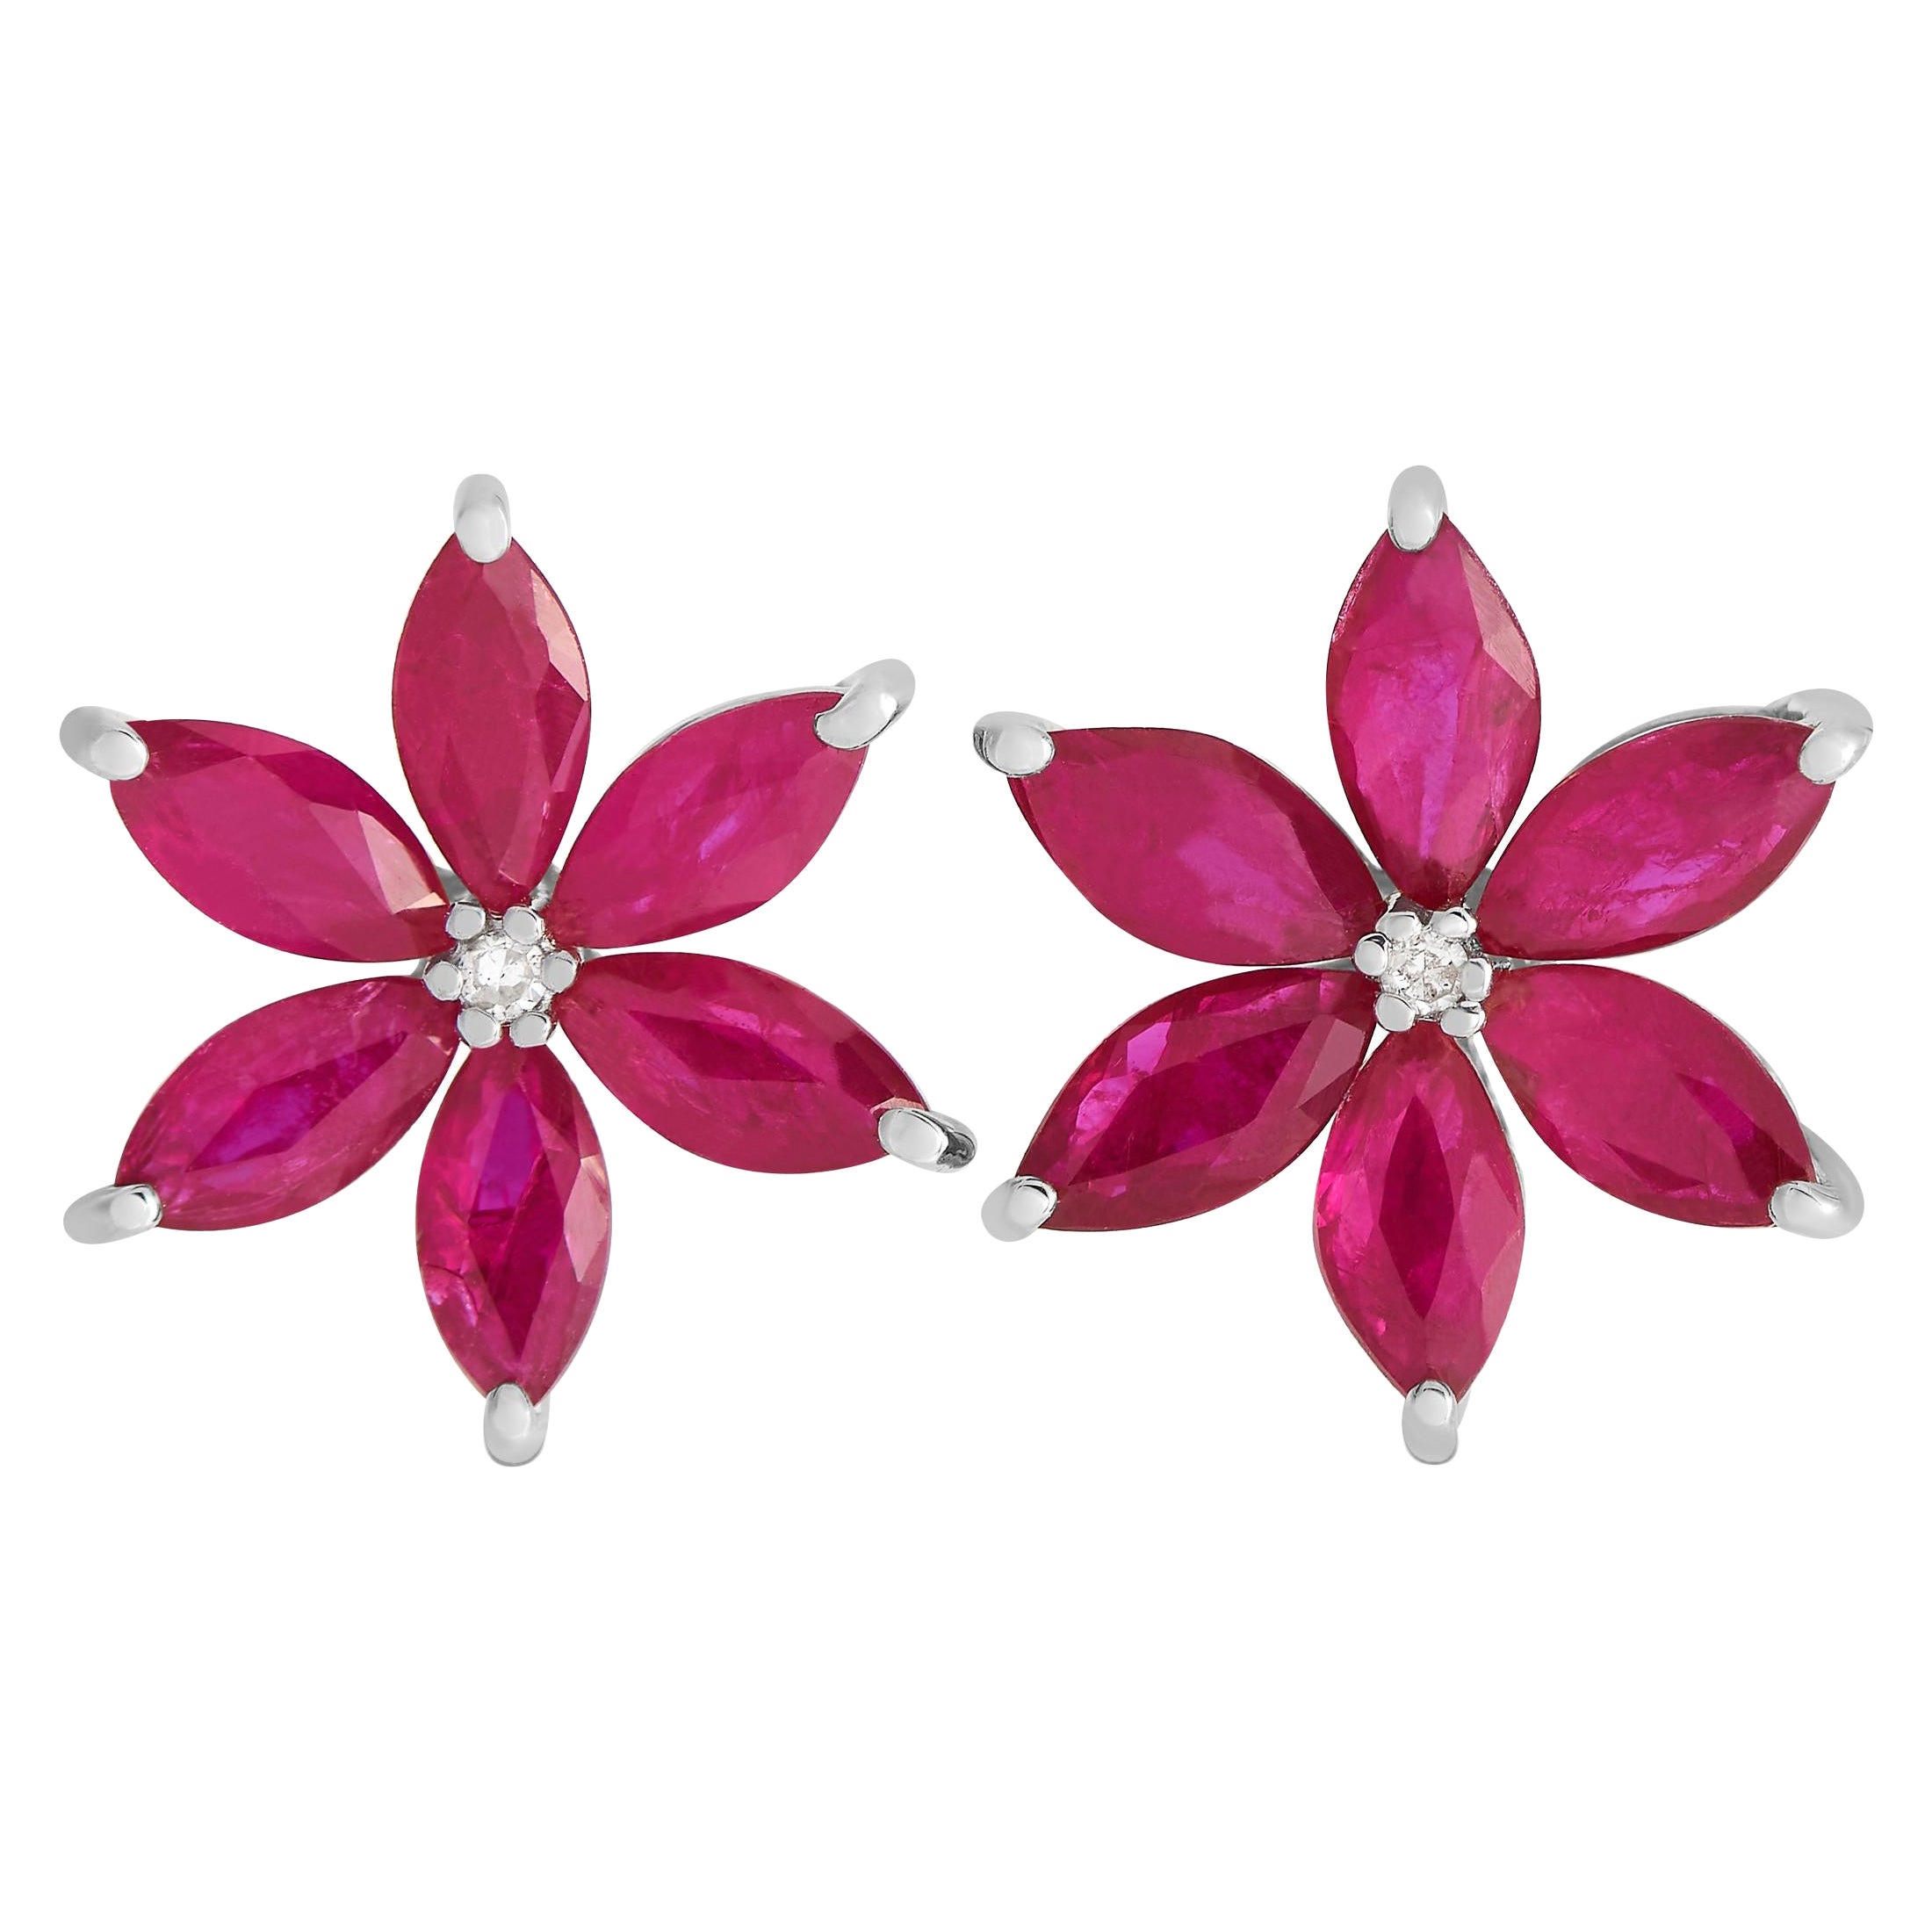 LB Exclusive 14K White Gold 0.01ct Diamond and Ruby Flower Earrings ER4-15657WRU For Sale